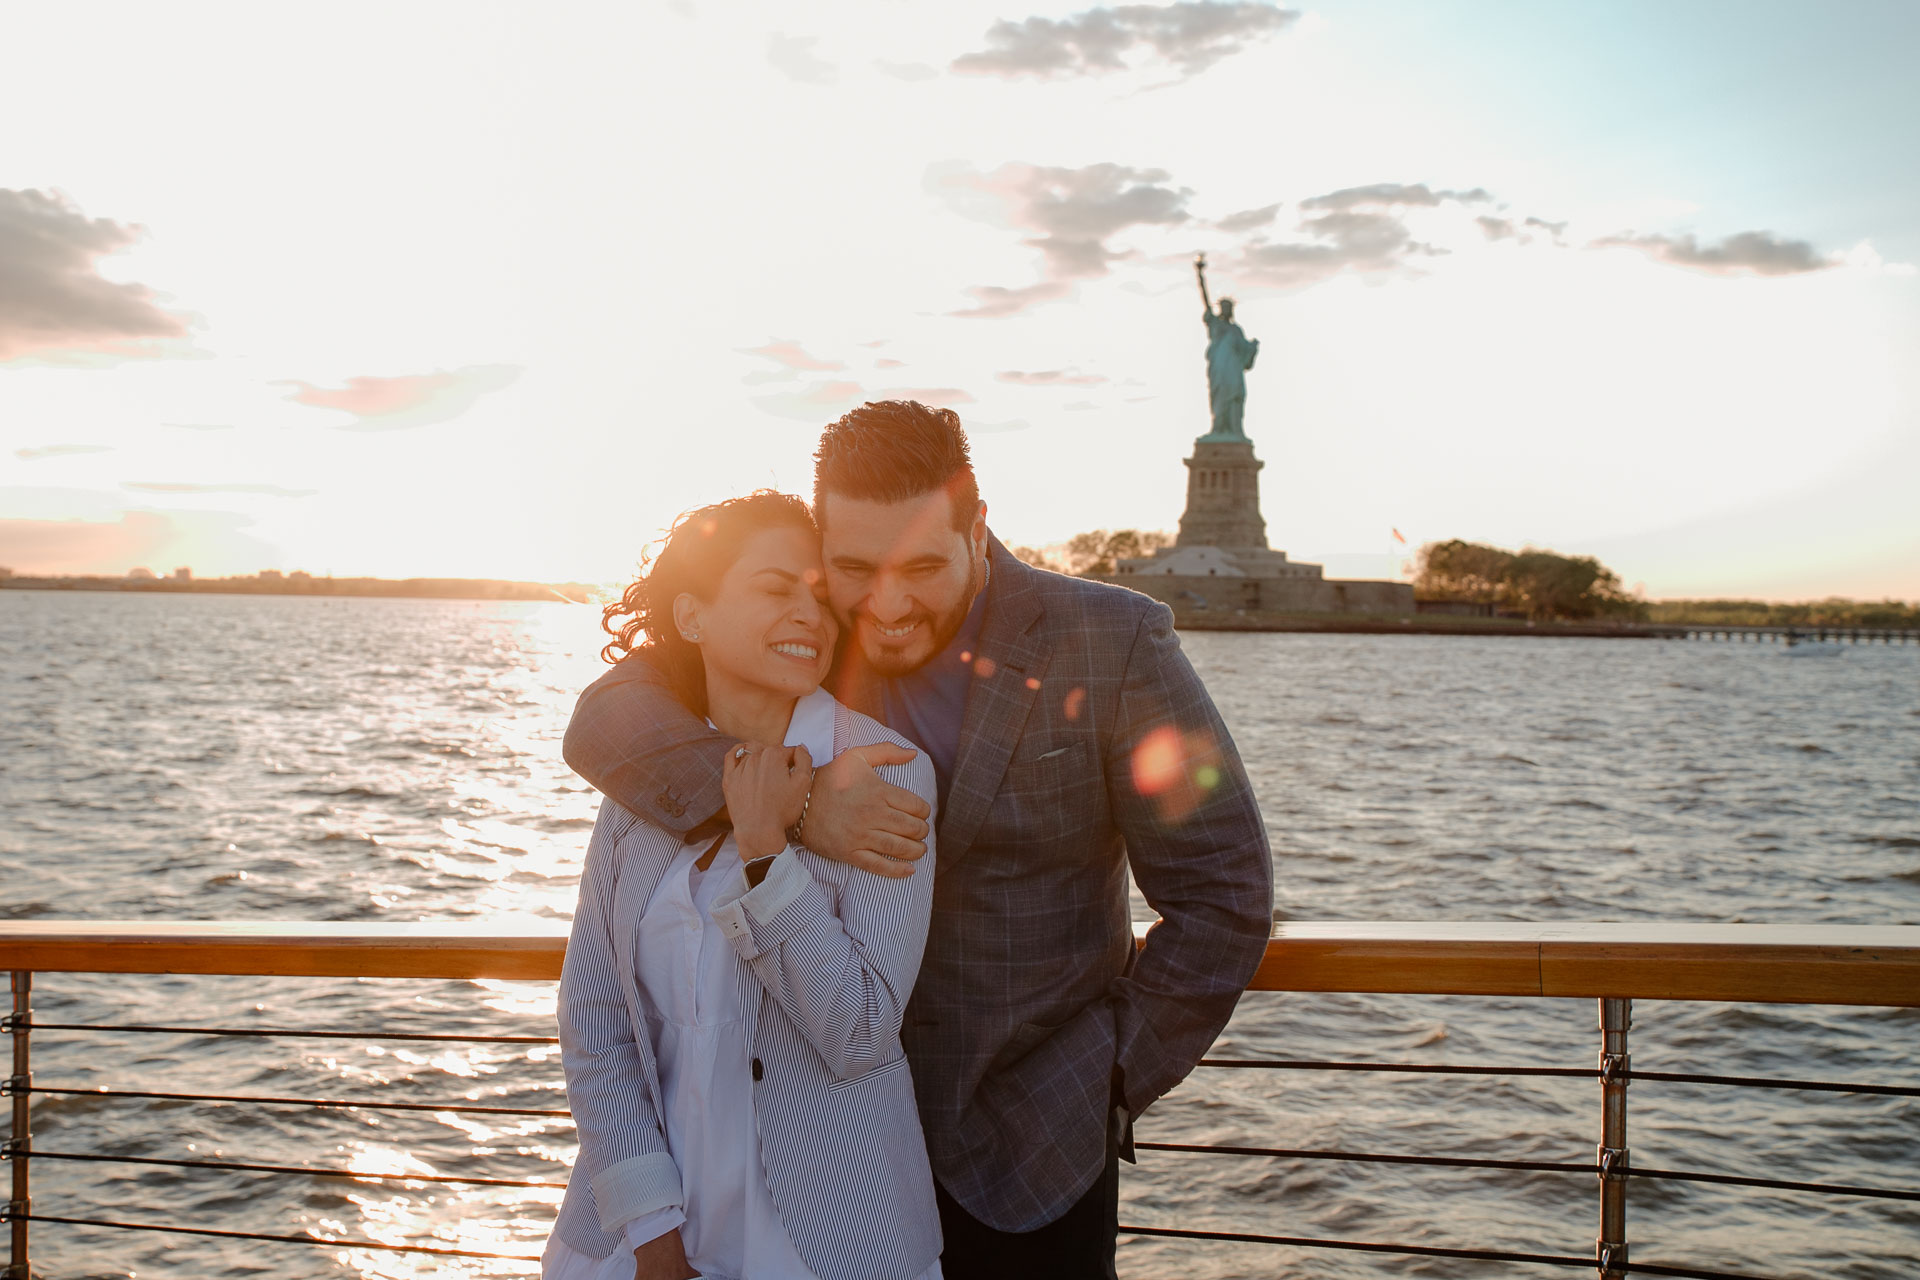 surprise proposal photoshoot on a boat with the liberty statue